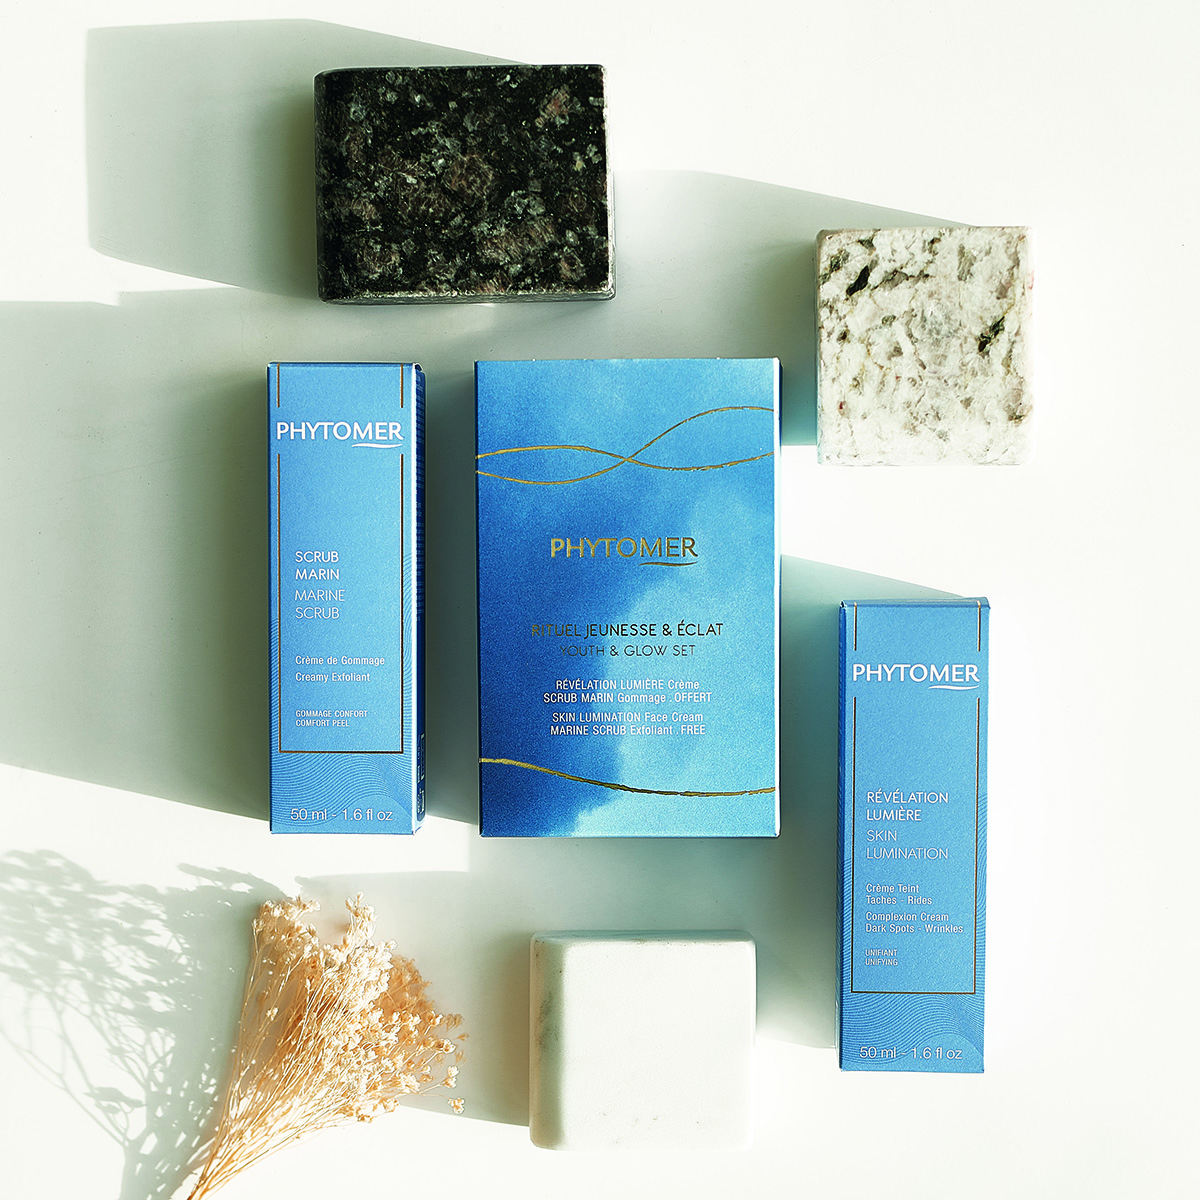 skin care products Phytomer at De Premier Spa